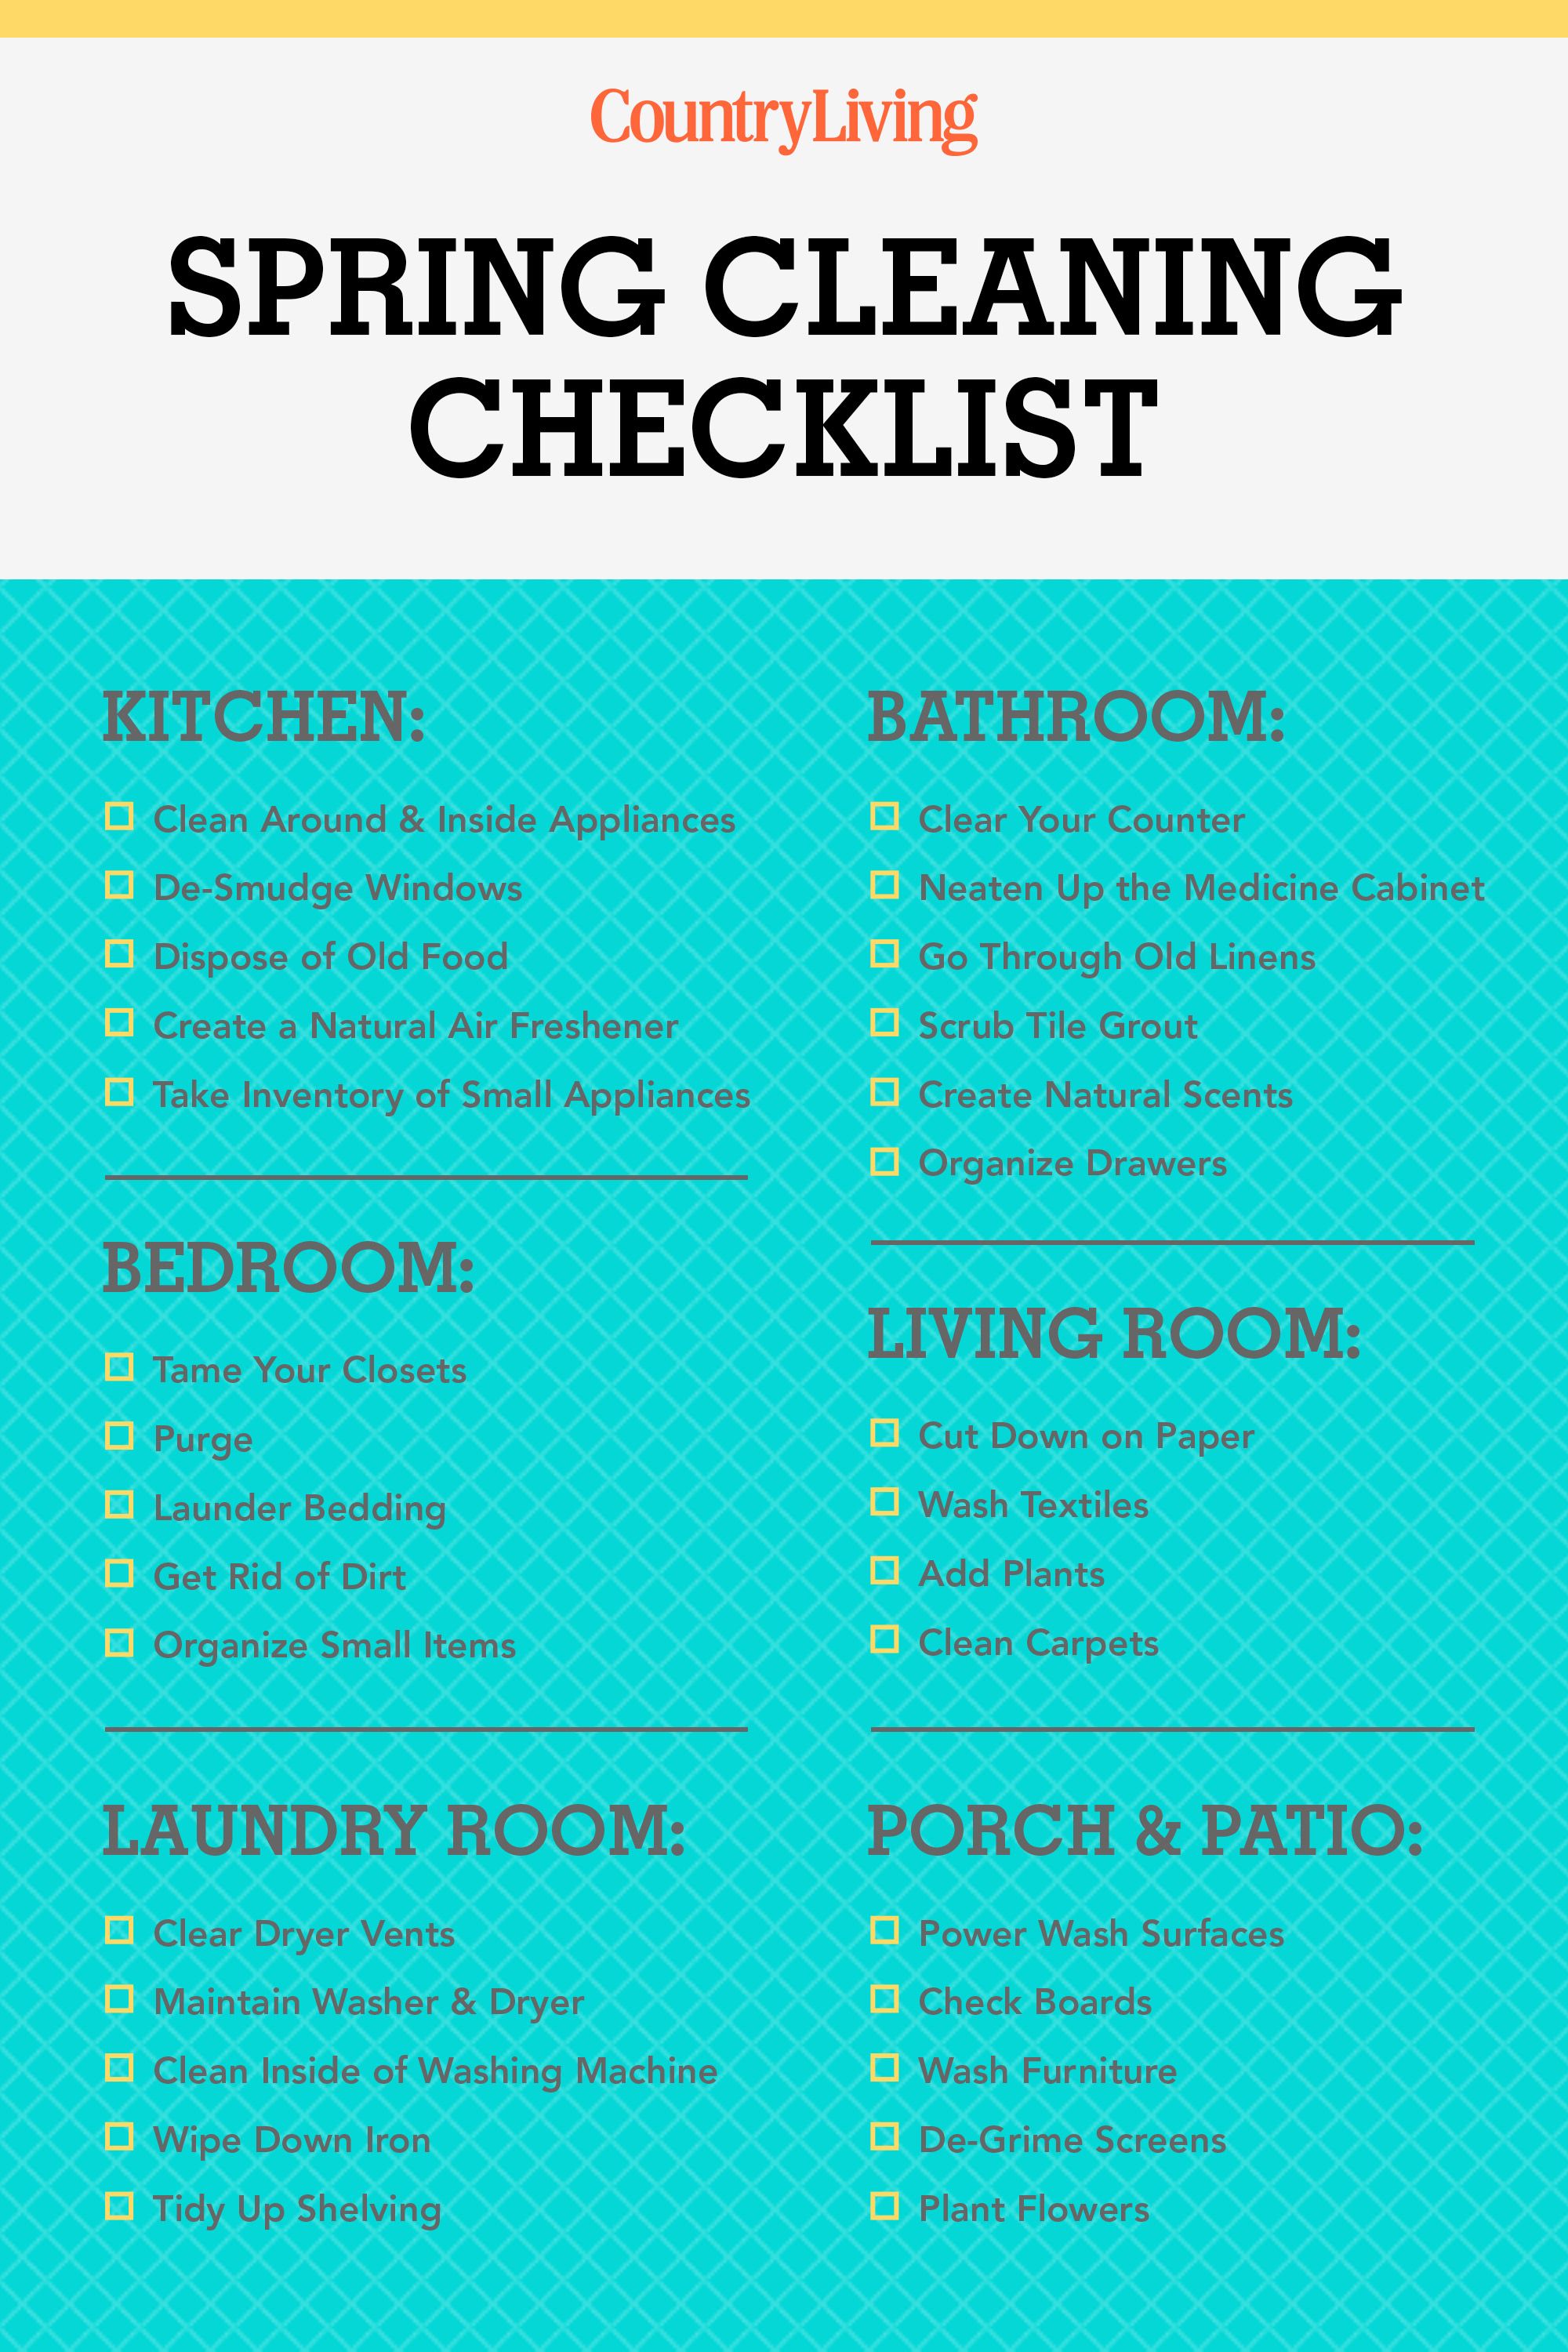 Laundry Room Checklist: What You Need for Your New Home